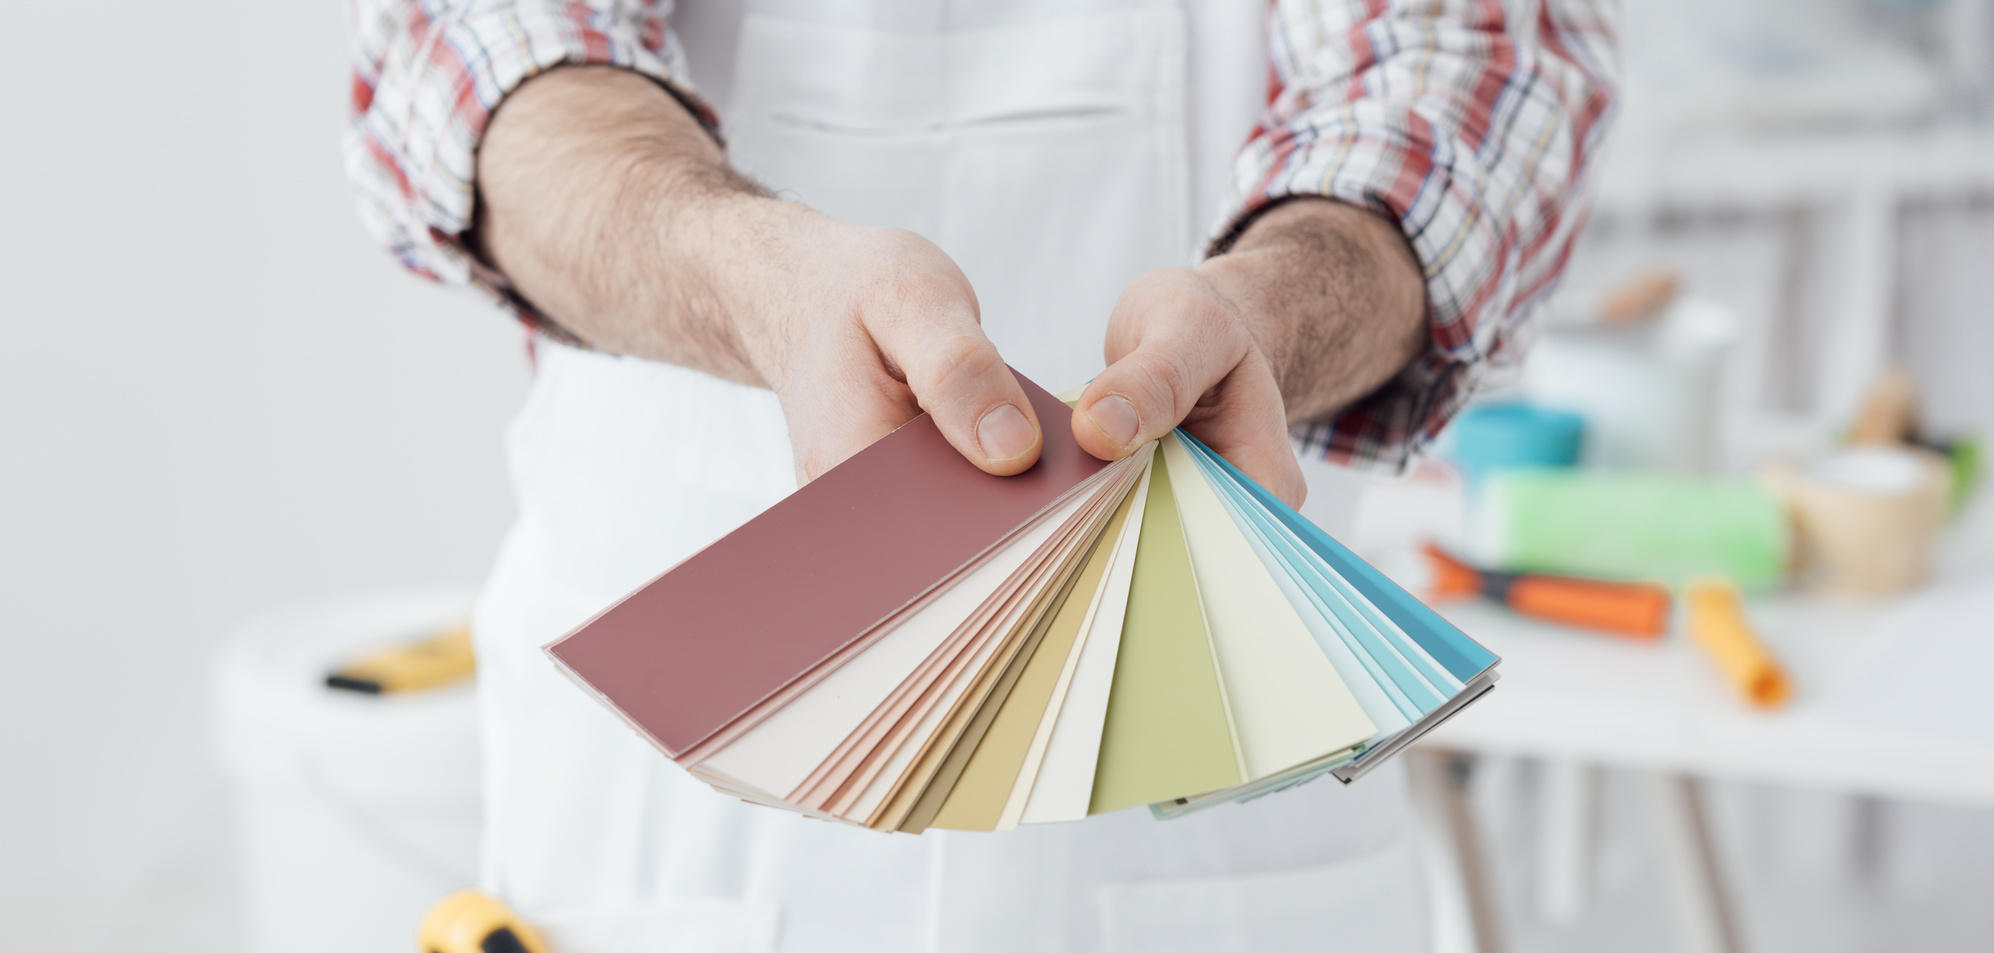 What Your Paint Color Says About You